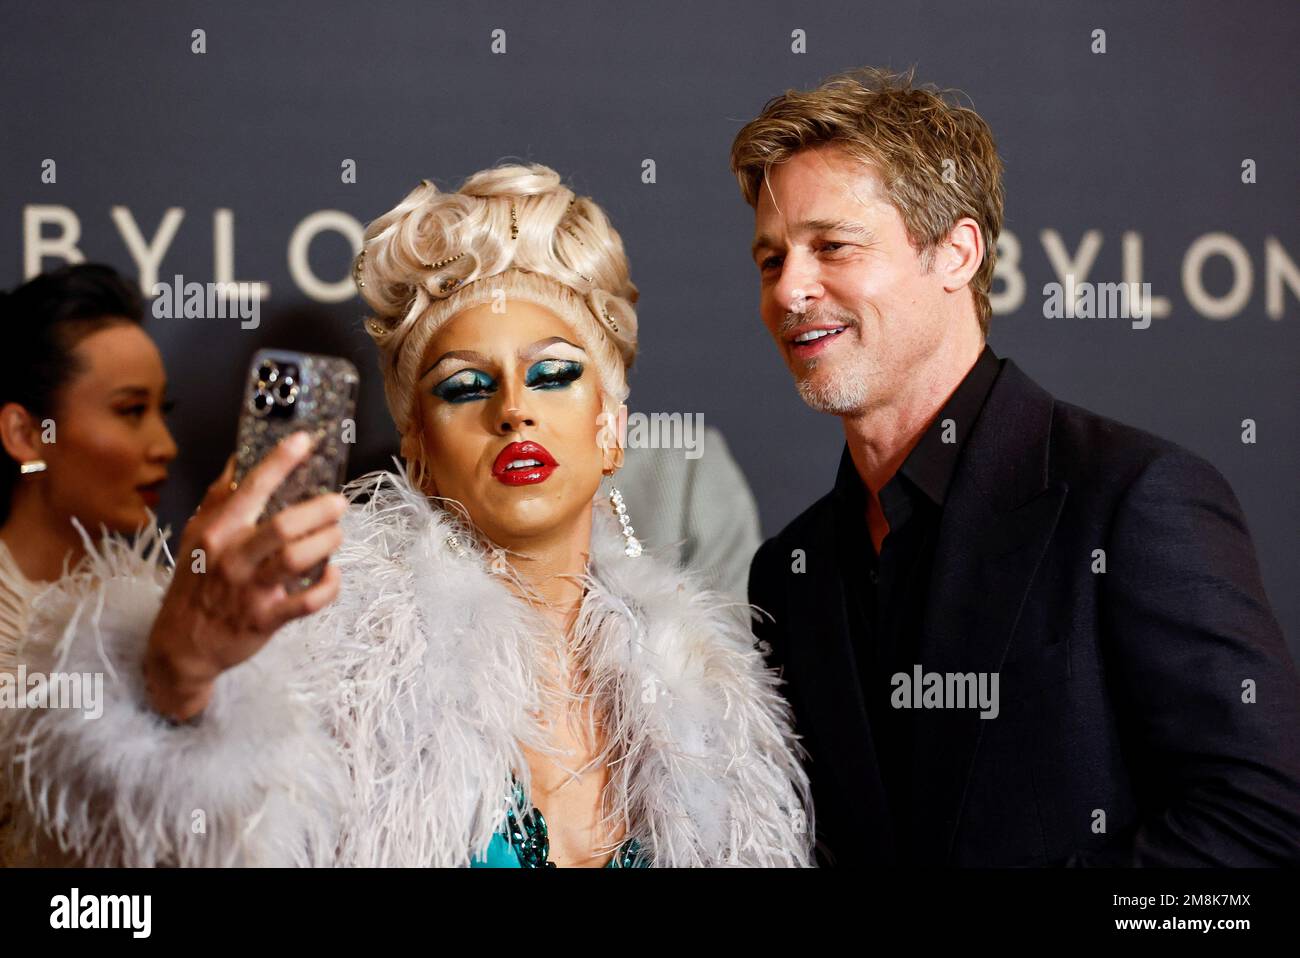 Actor Brad Pitt poses with Drag Queen Lolita Banana during a photocall for the film ''Babylon" at the Grand Rex in Paris, France January 14, 2023. REUTERS/Gonzalo Fuentes Stock Photo - Alamy